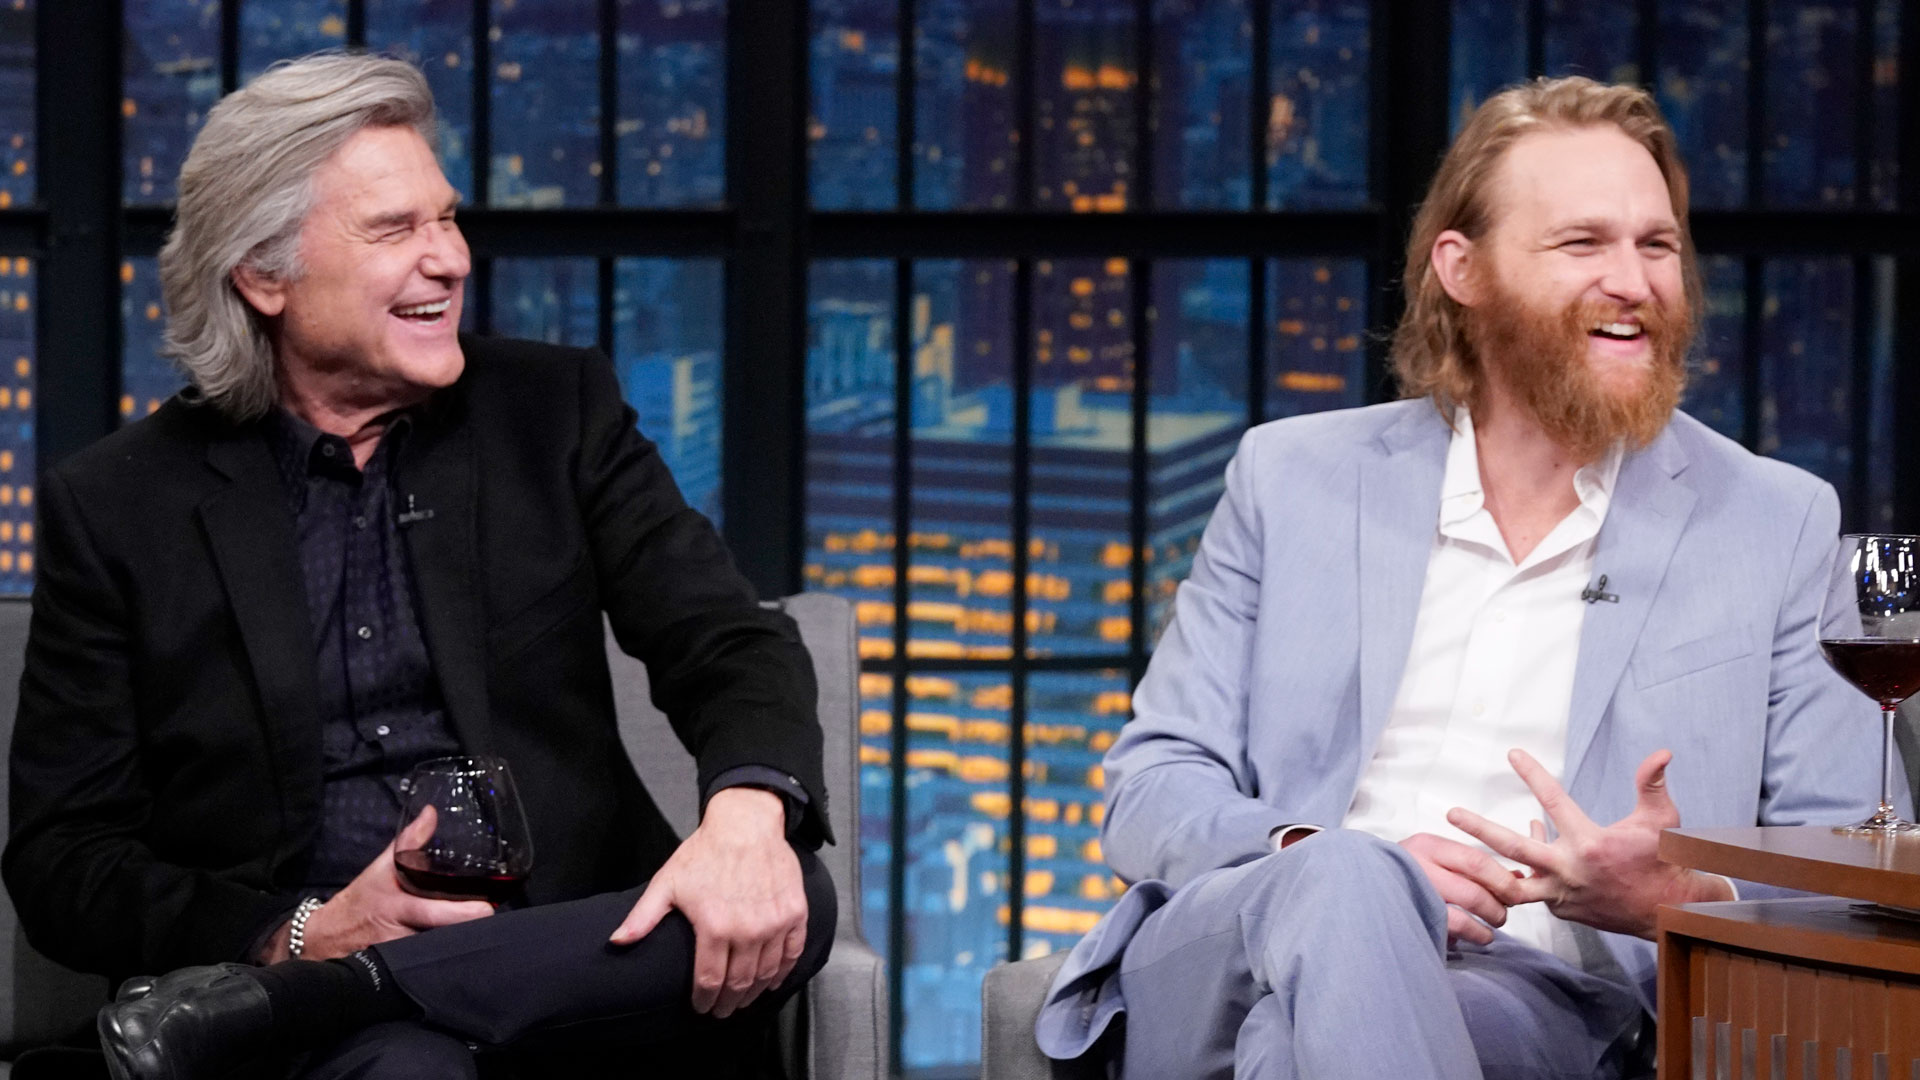 Find Out the Show Bringing Father-Son Duo Kurt & Wyatt Russell Together  On-Screen